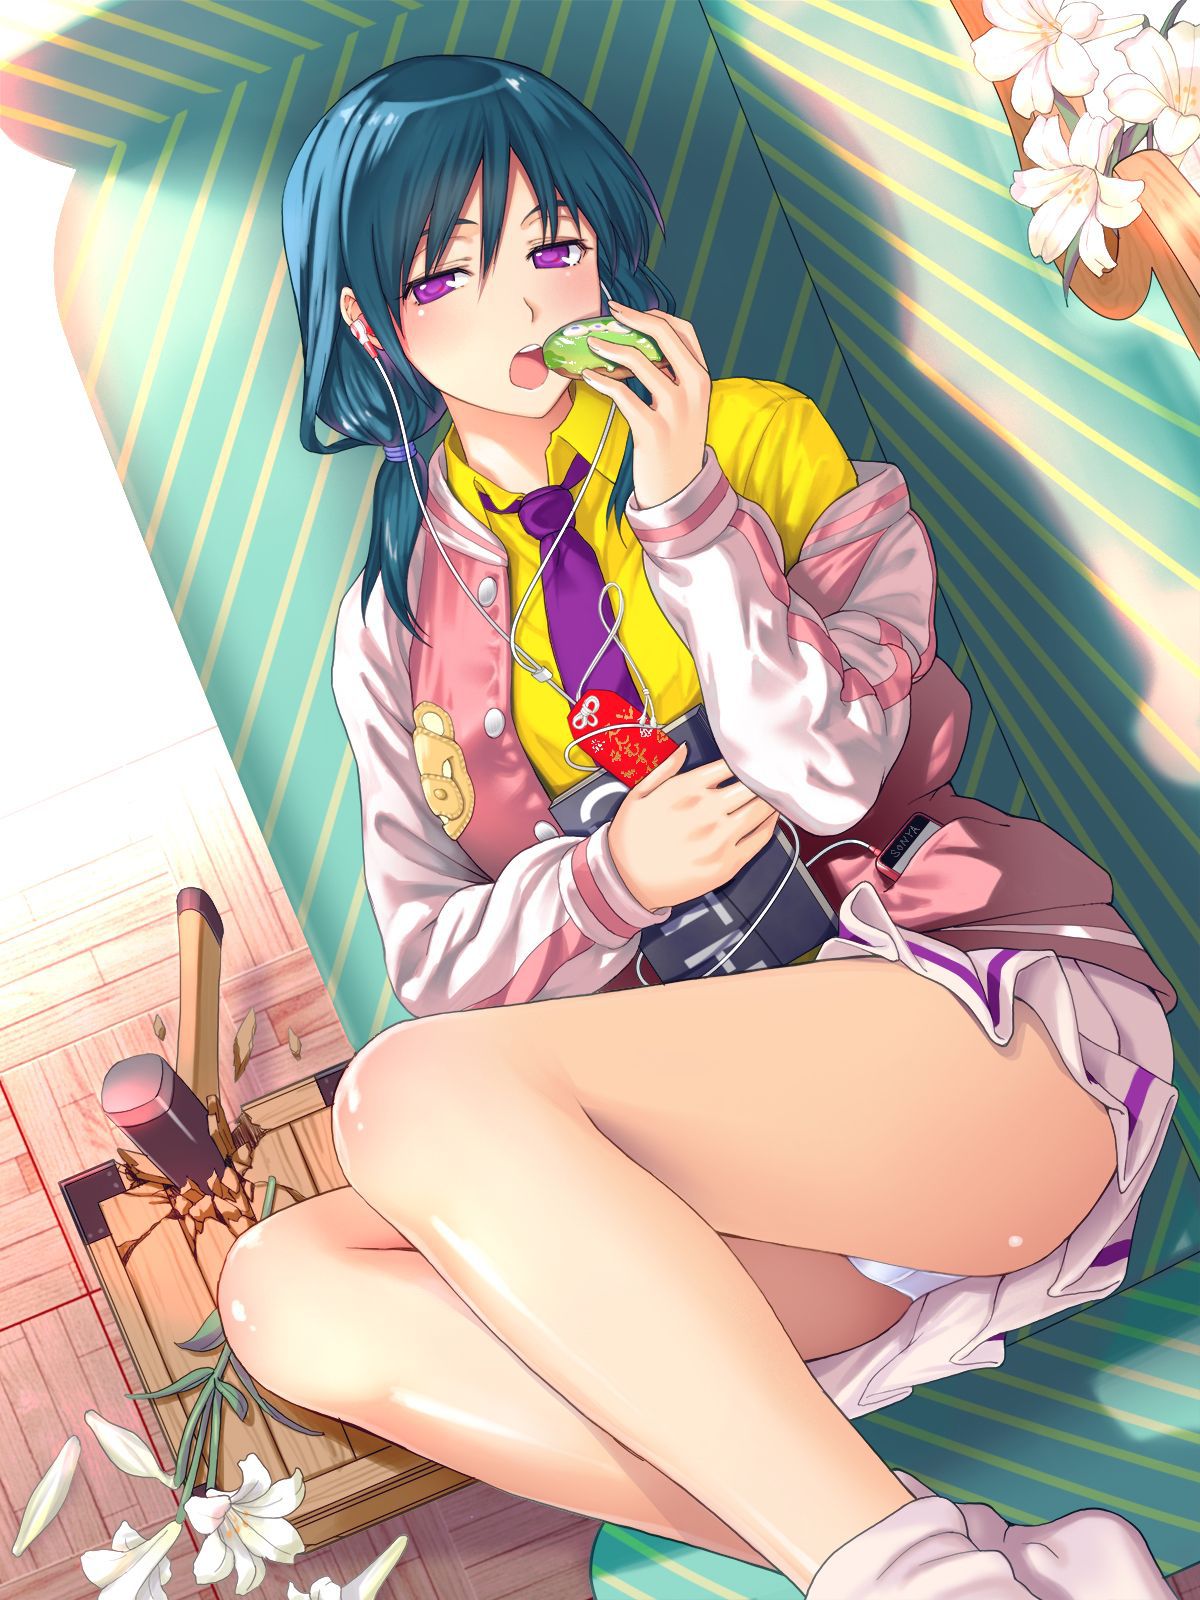 Secondary erotic erotic image of a girl who is lewd development panchira of royal road [30 pieces] 3